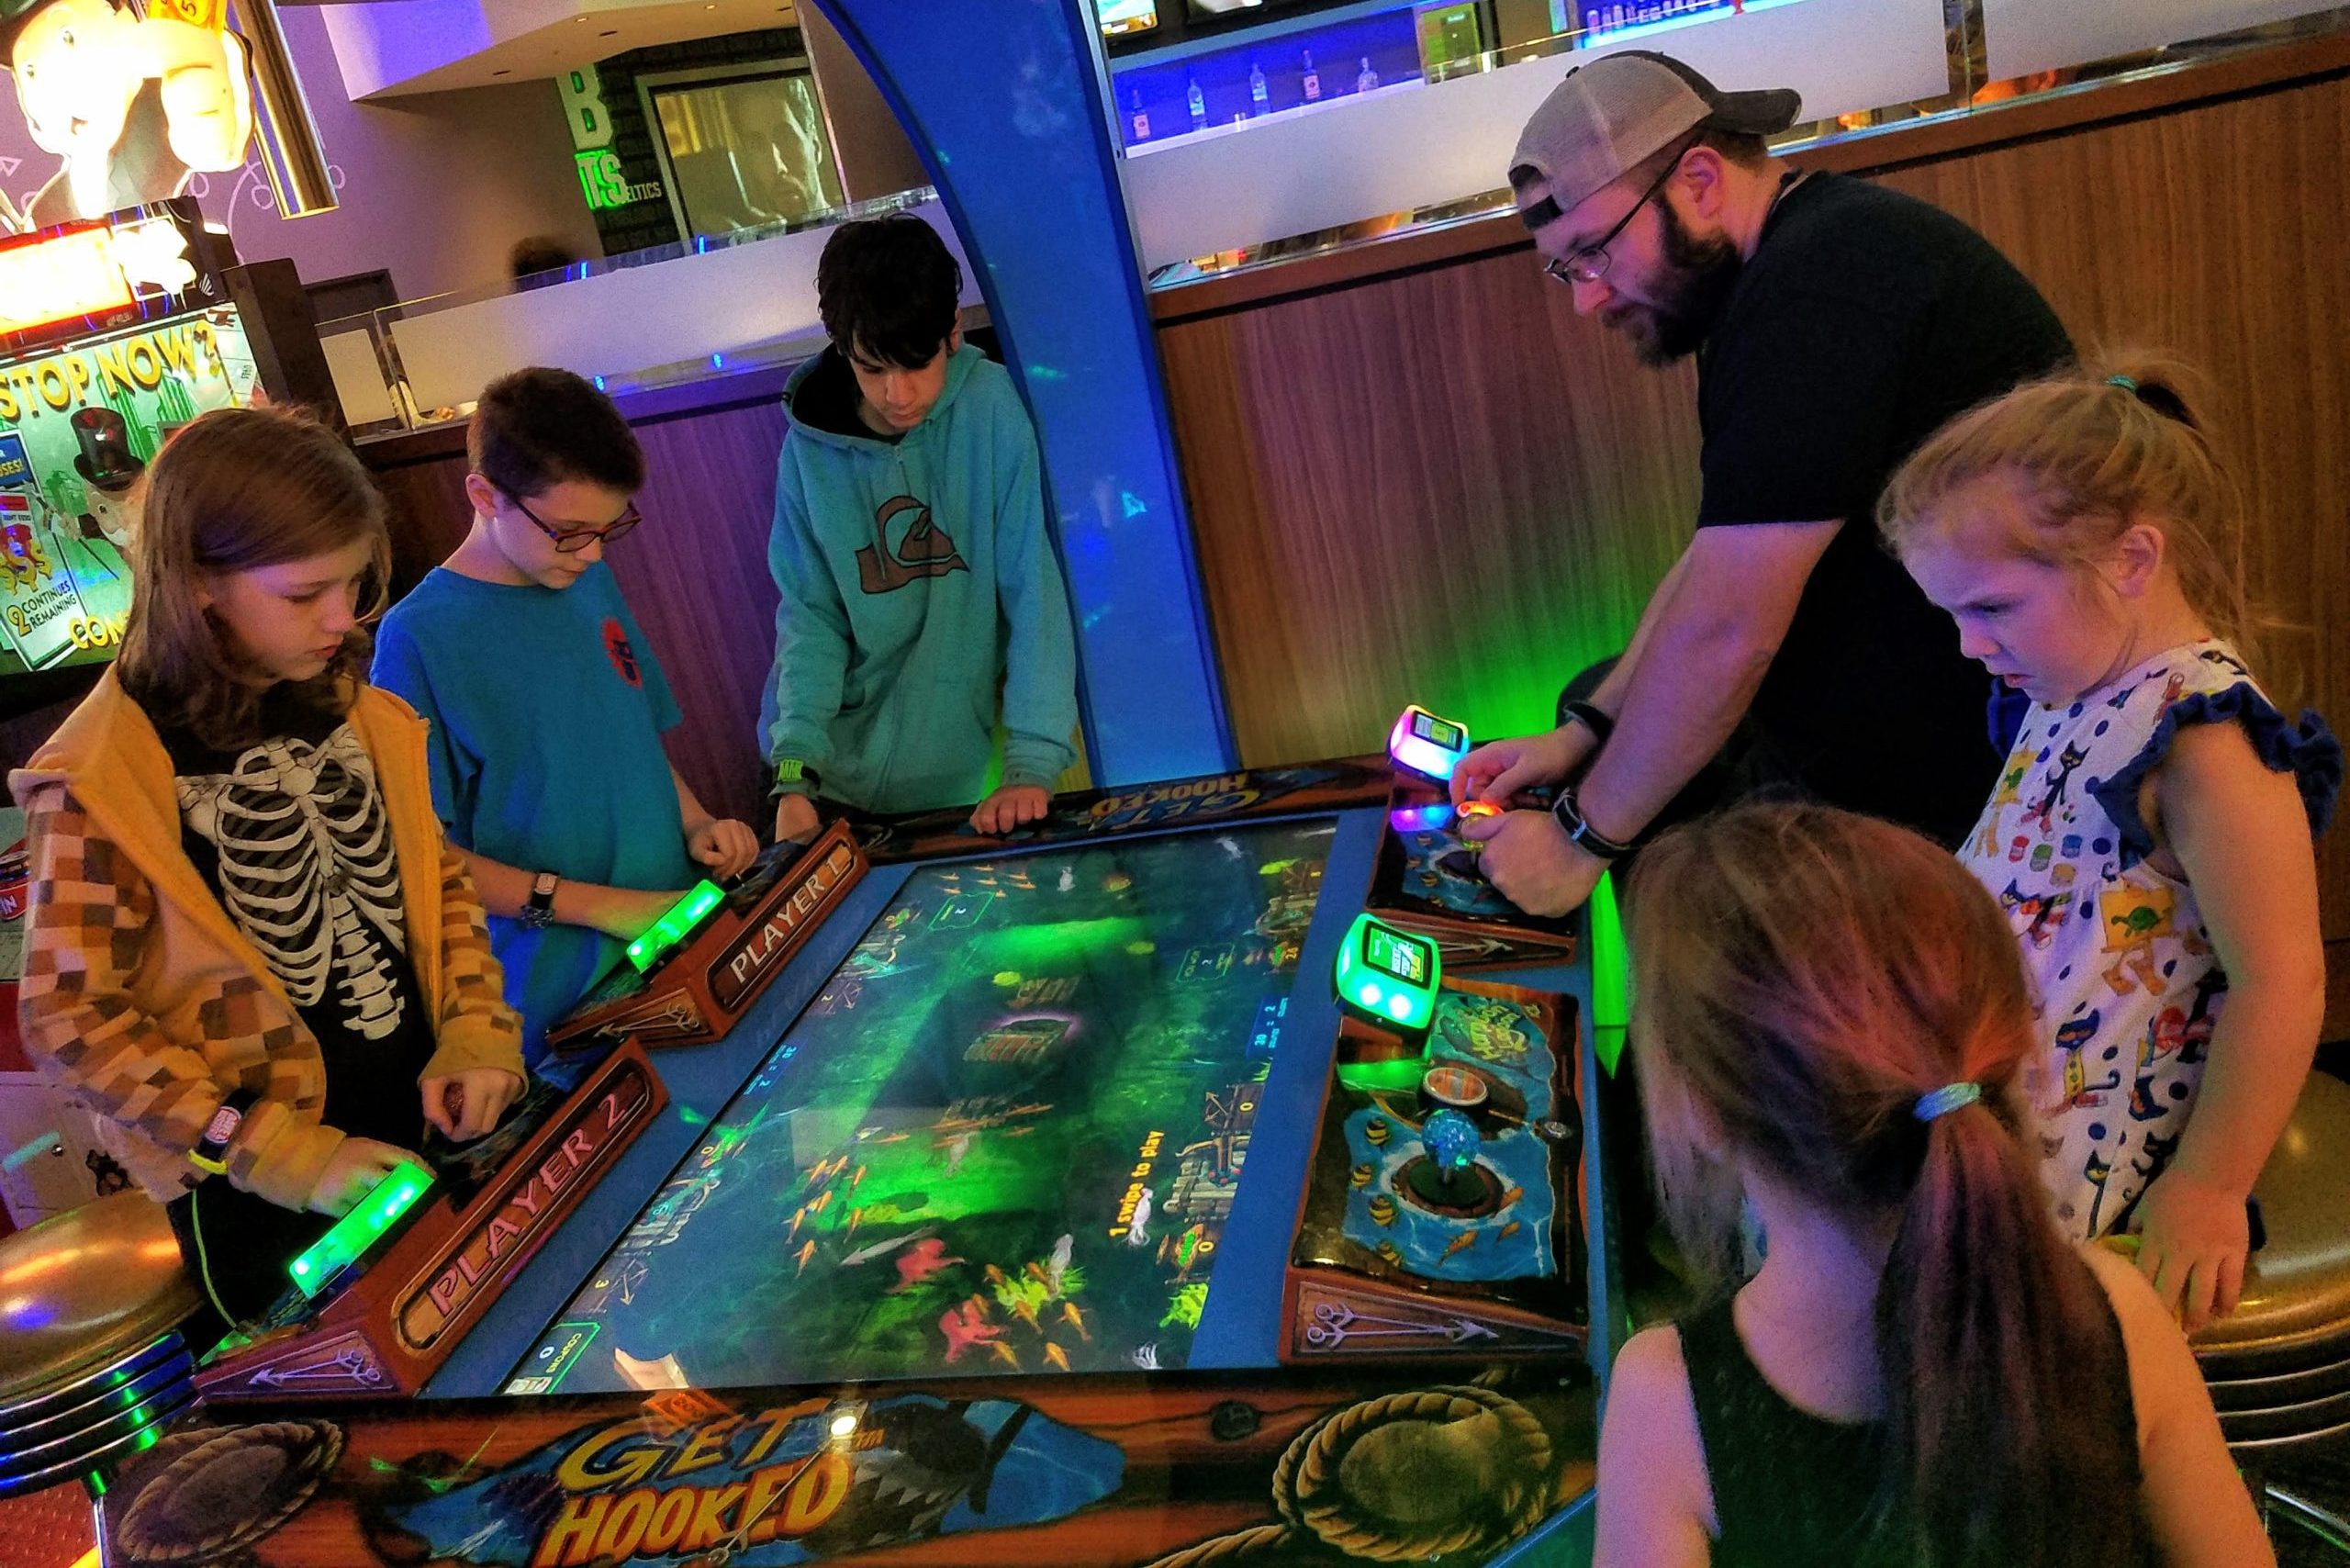 family with teenagers enjoying arcade games in Boston